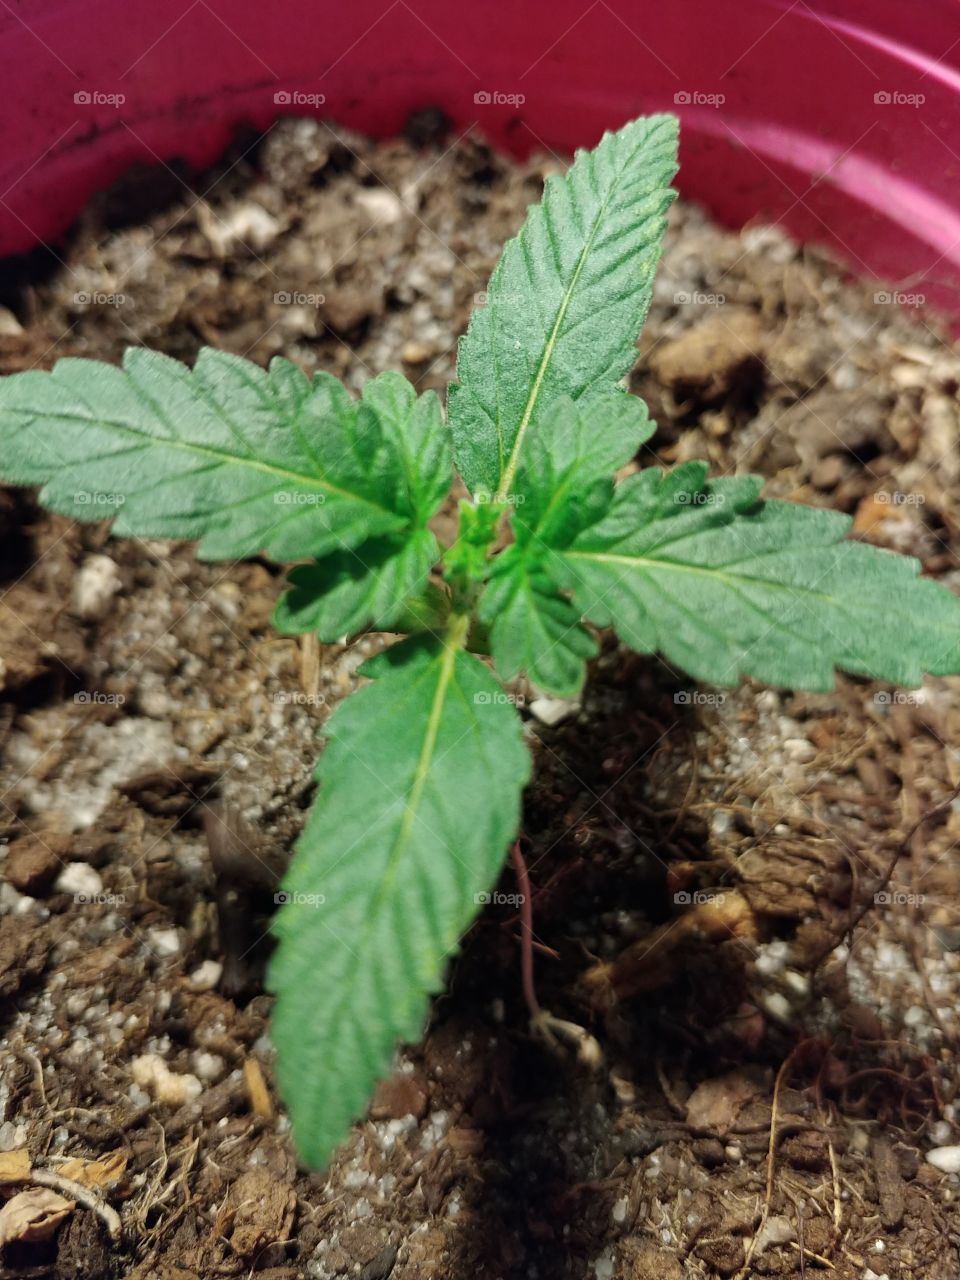 this is my first autoflower. i live in a place where its legal to grow my own medication. these types grow quickly so you can grow more in a shorter period of time. this one in particular will be done in 65-70 days.